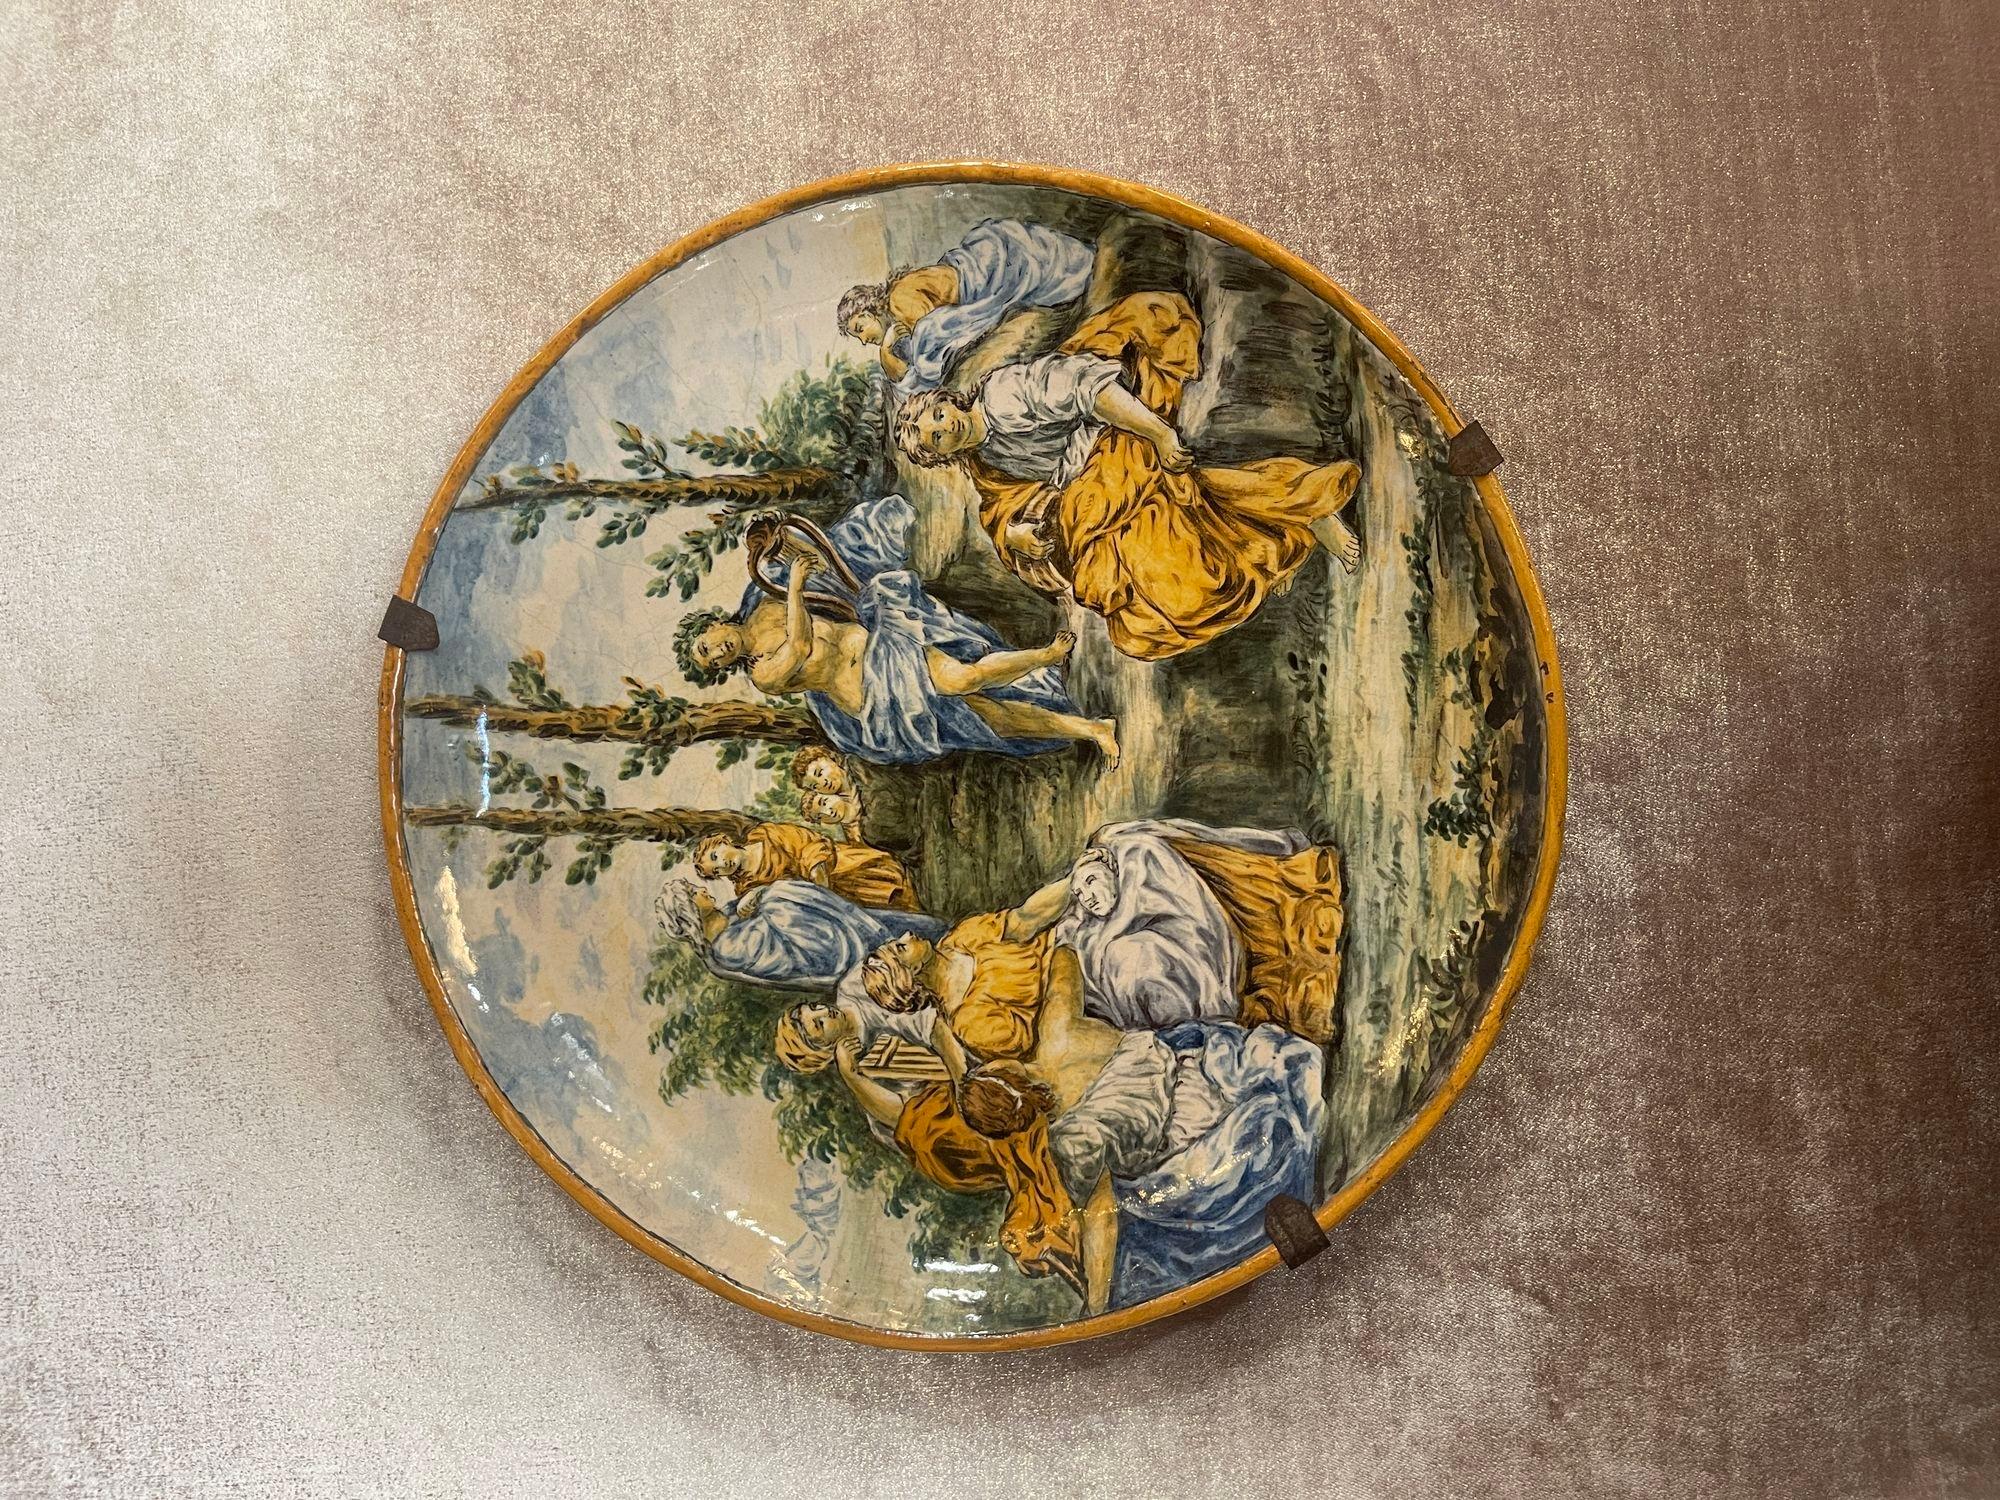 19th Century Italian Majolica charger with hand painted scenery in great detail.
Dimensions:
2